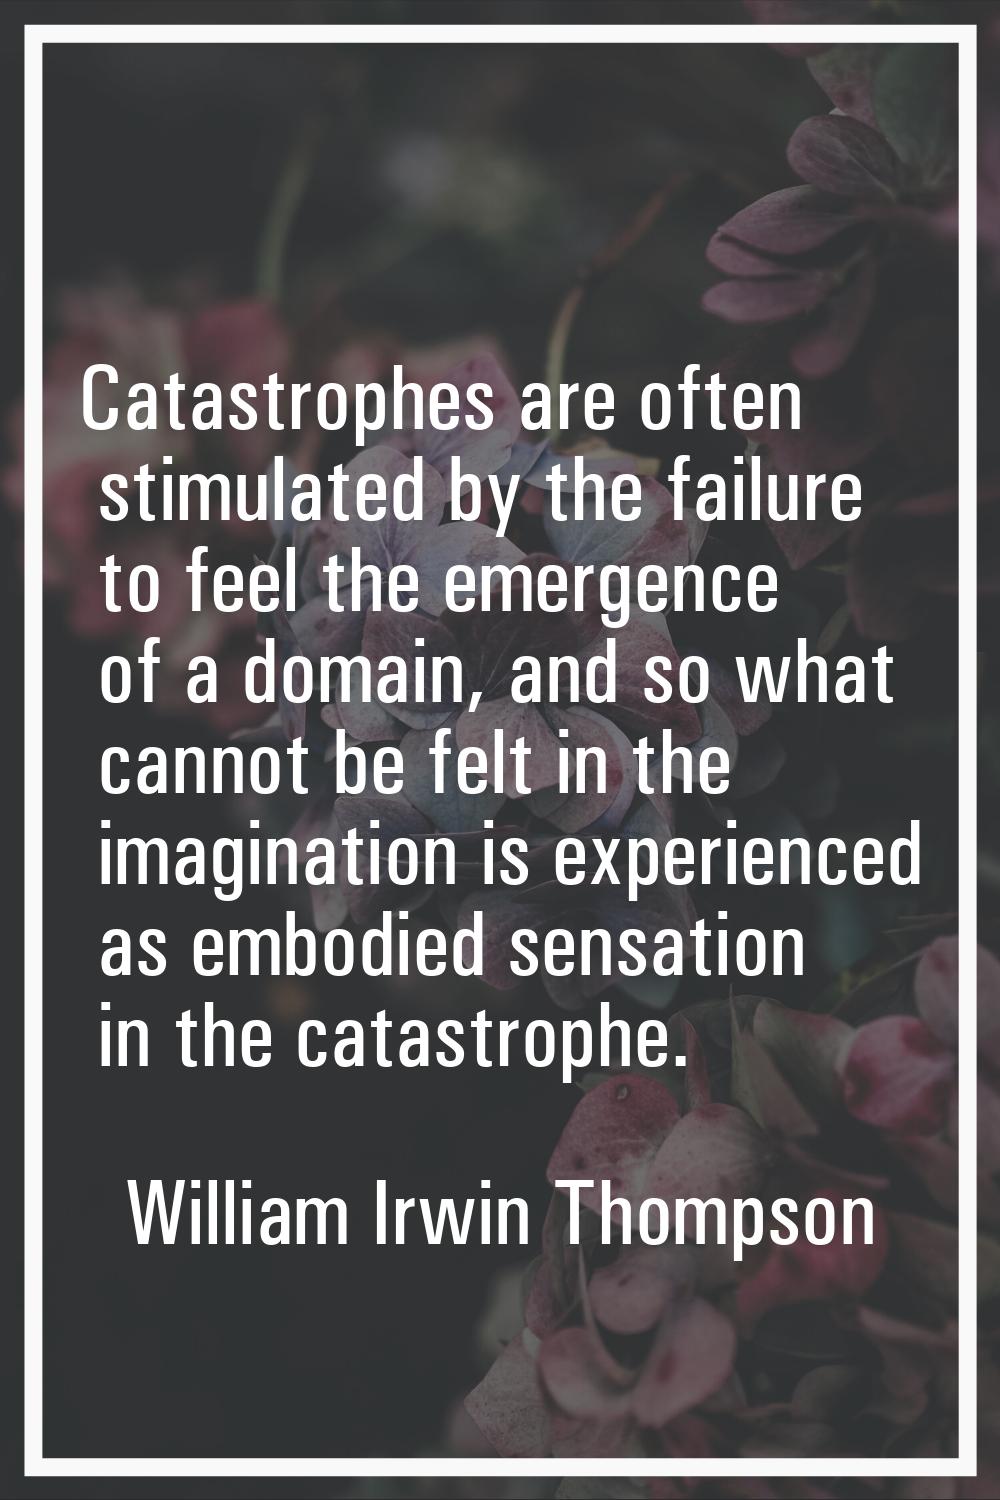 Catastrophes are often stimulated by the failure to feel the emergence of a domain, and so what can